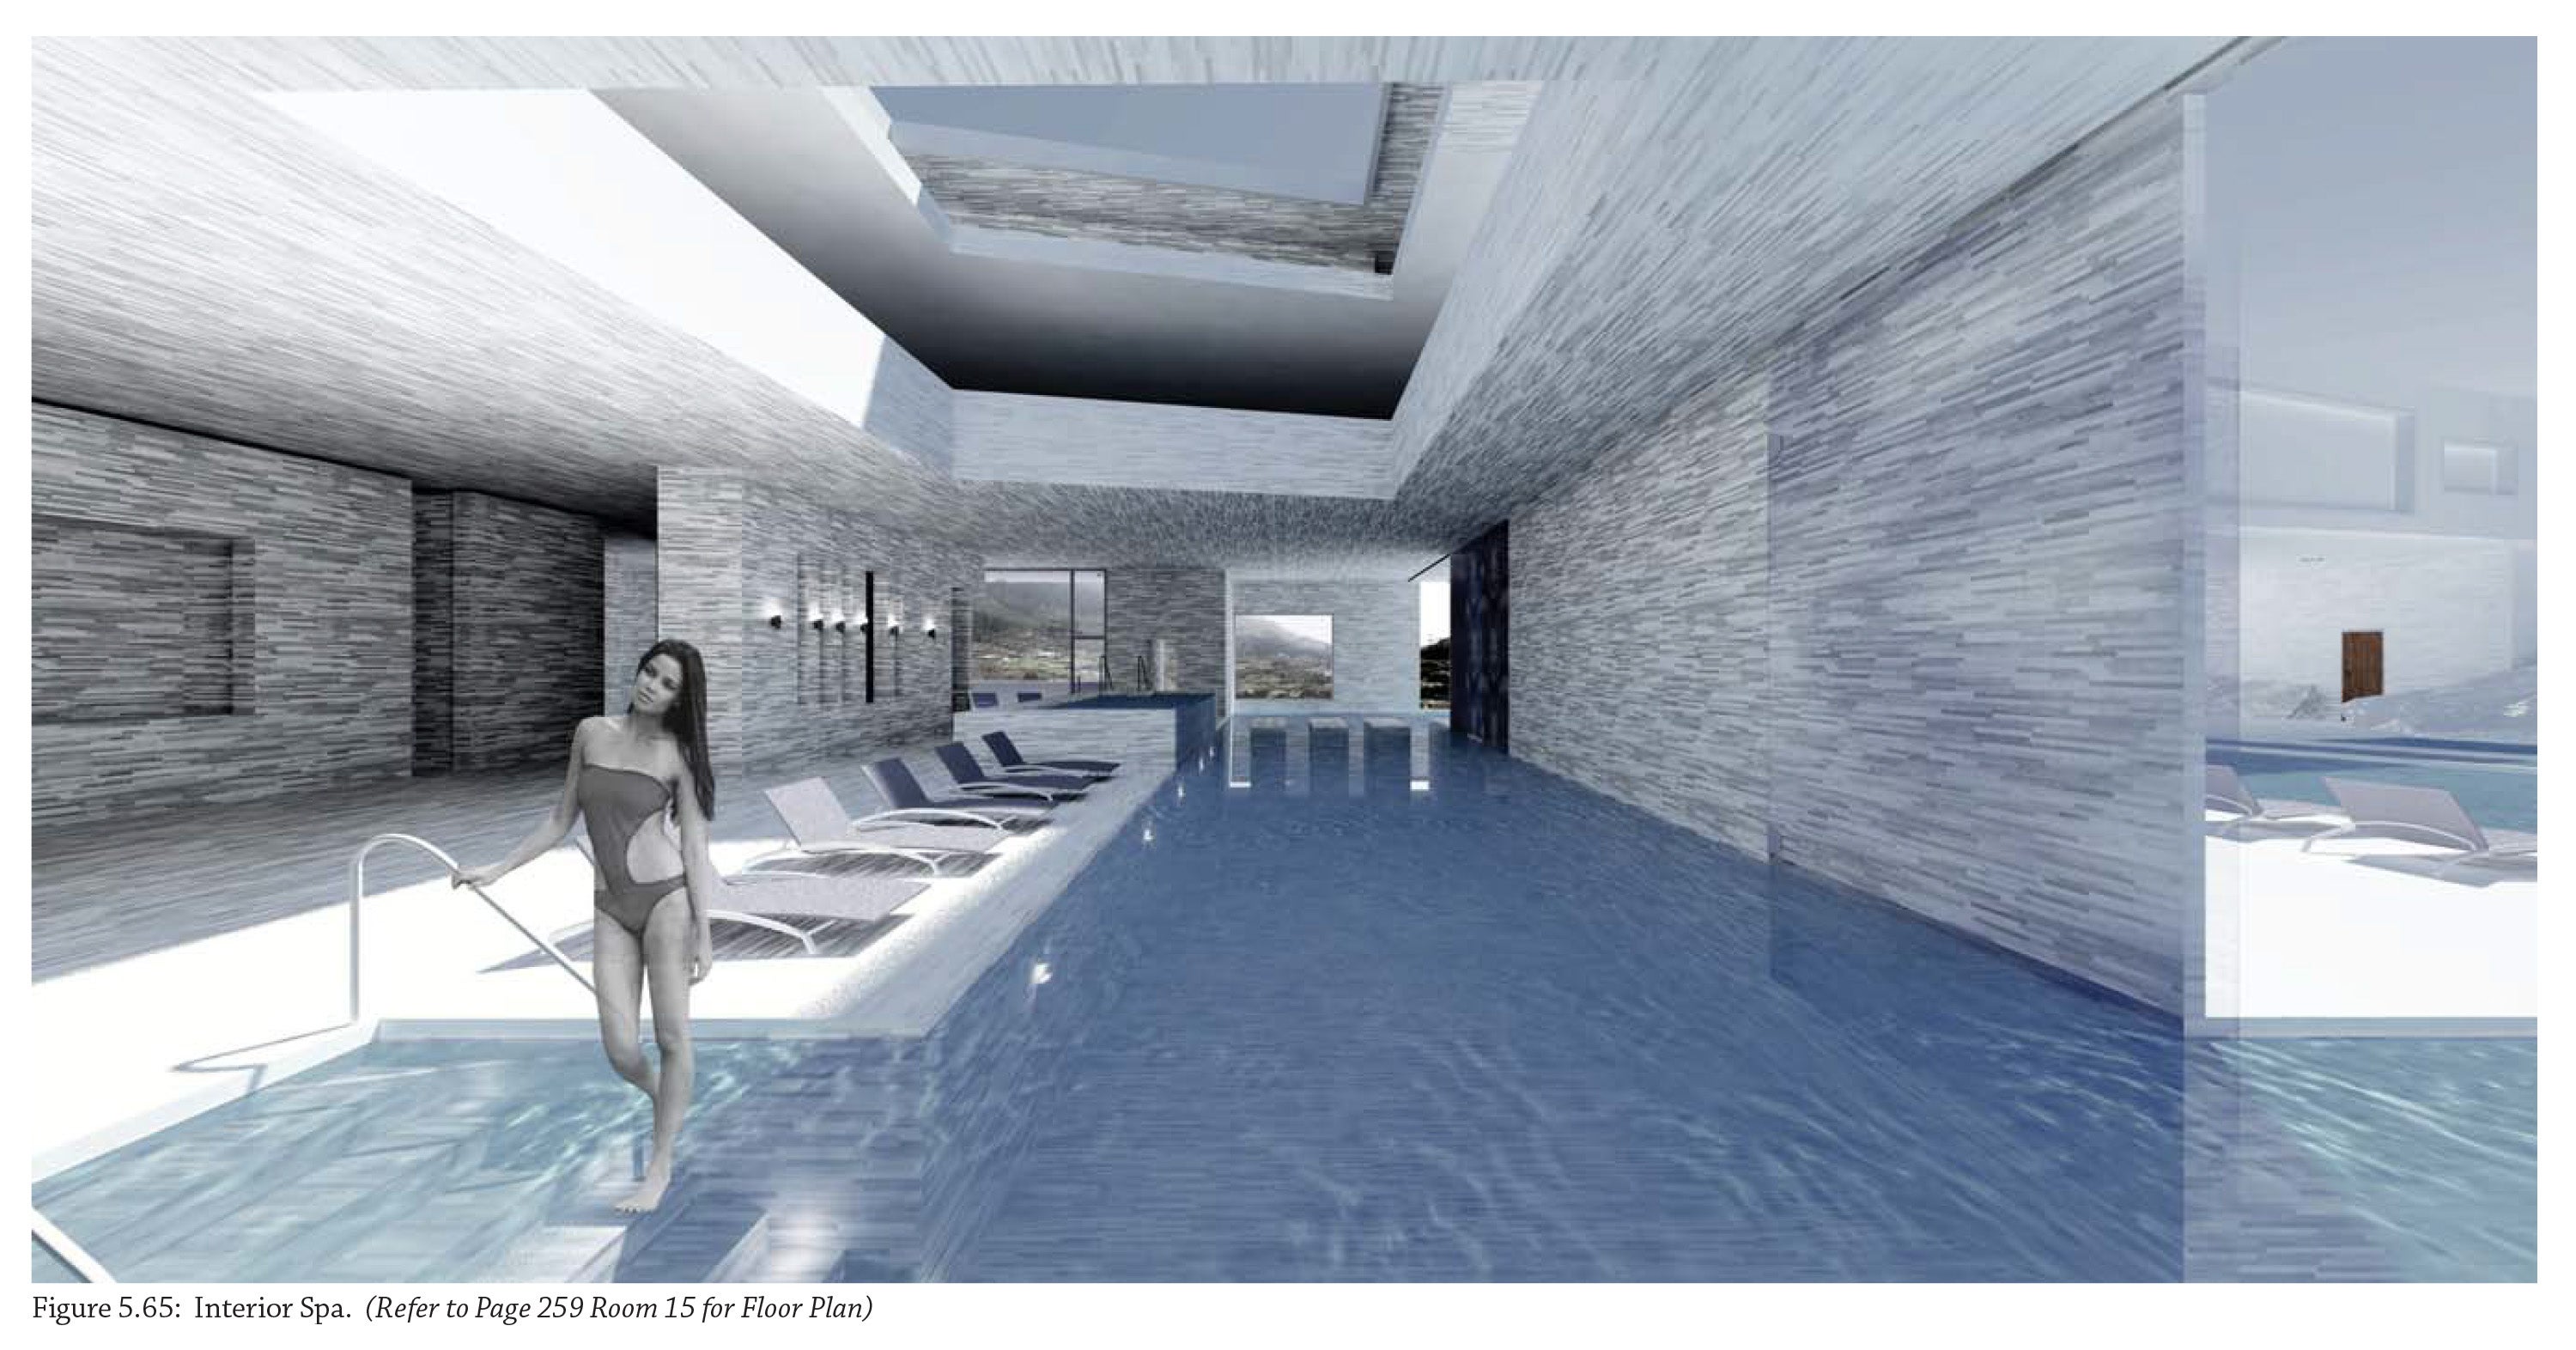 An interior render of a pool inside the building, with sunlight coming down from its skylights.